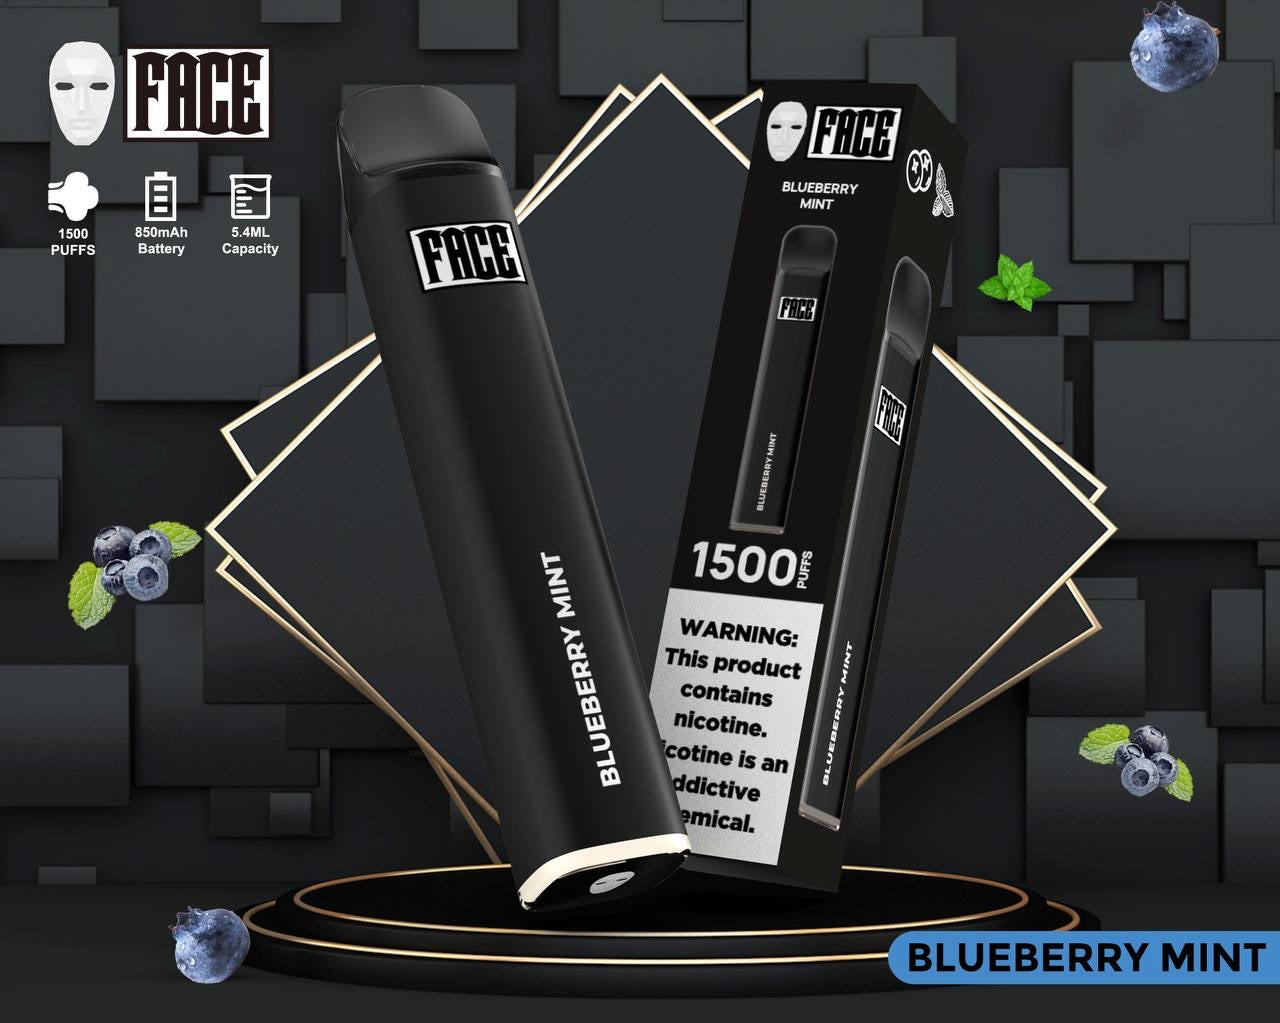 Face blueberry Mint 1500